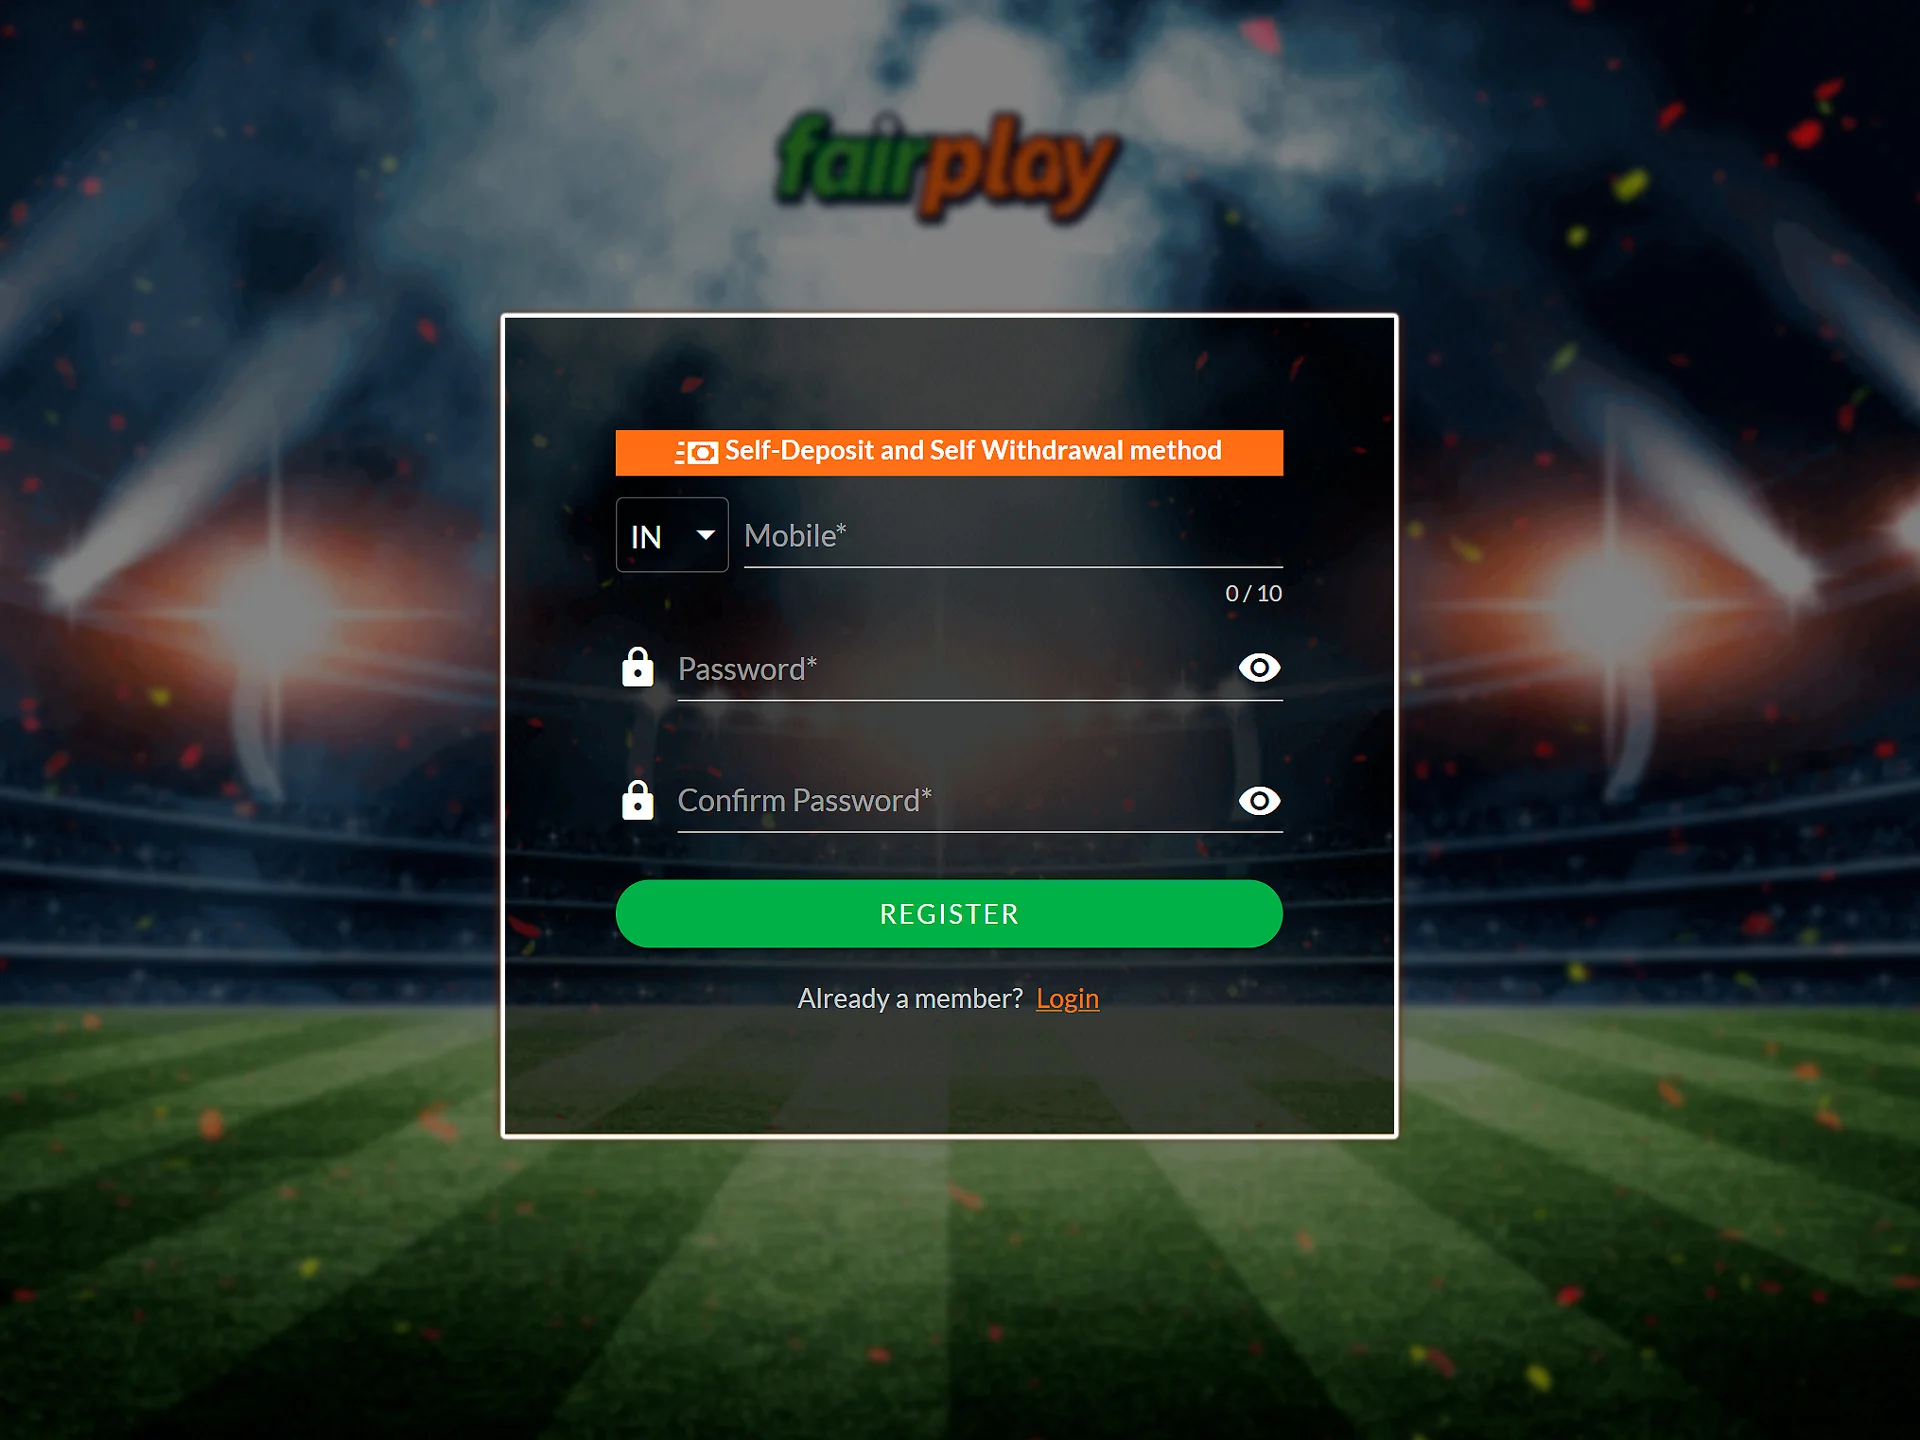 Register or log in to the Fair Play website if you already have an account.